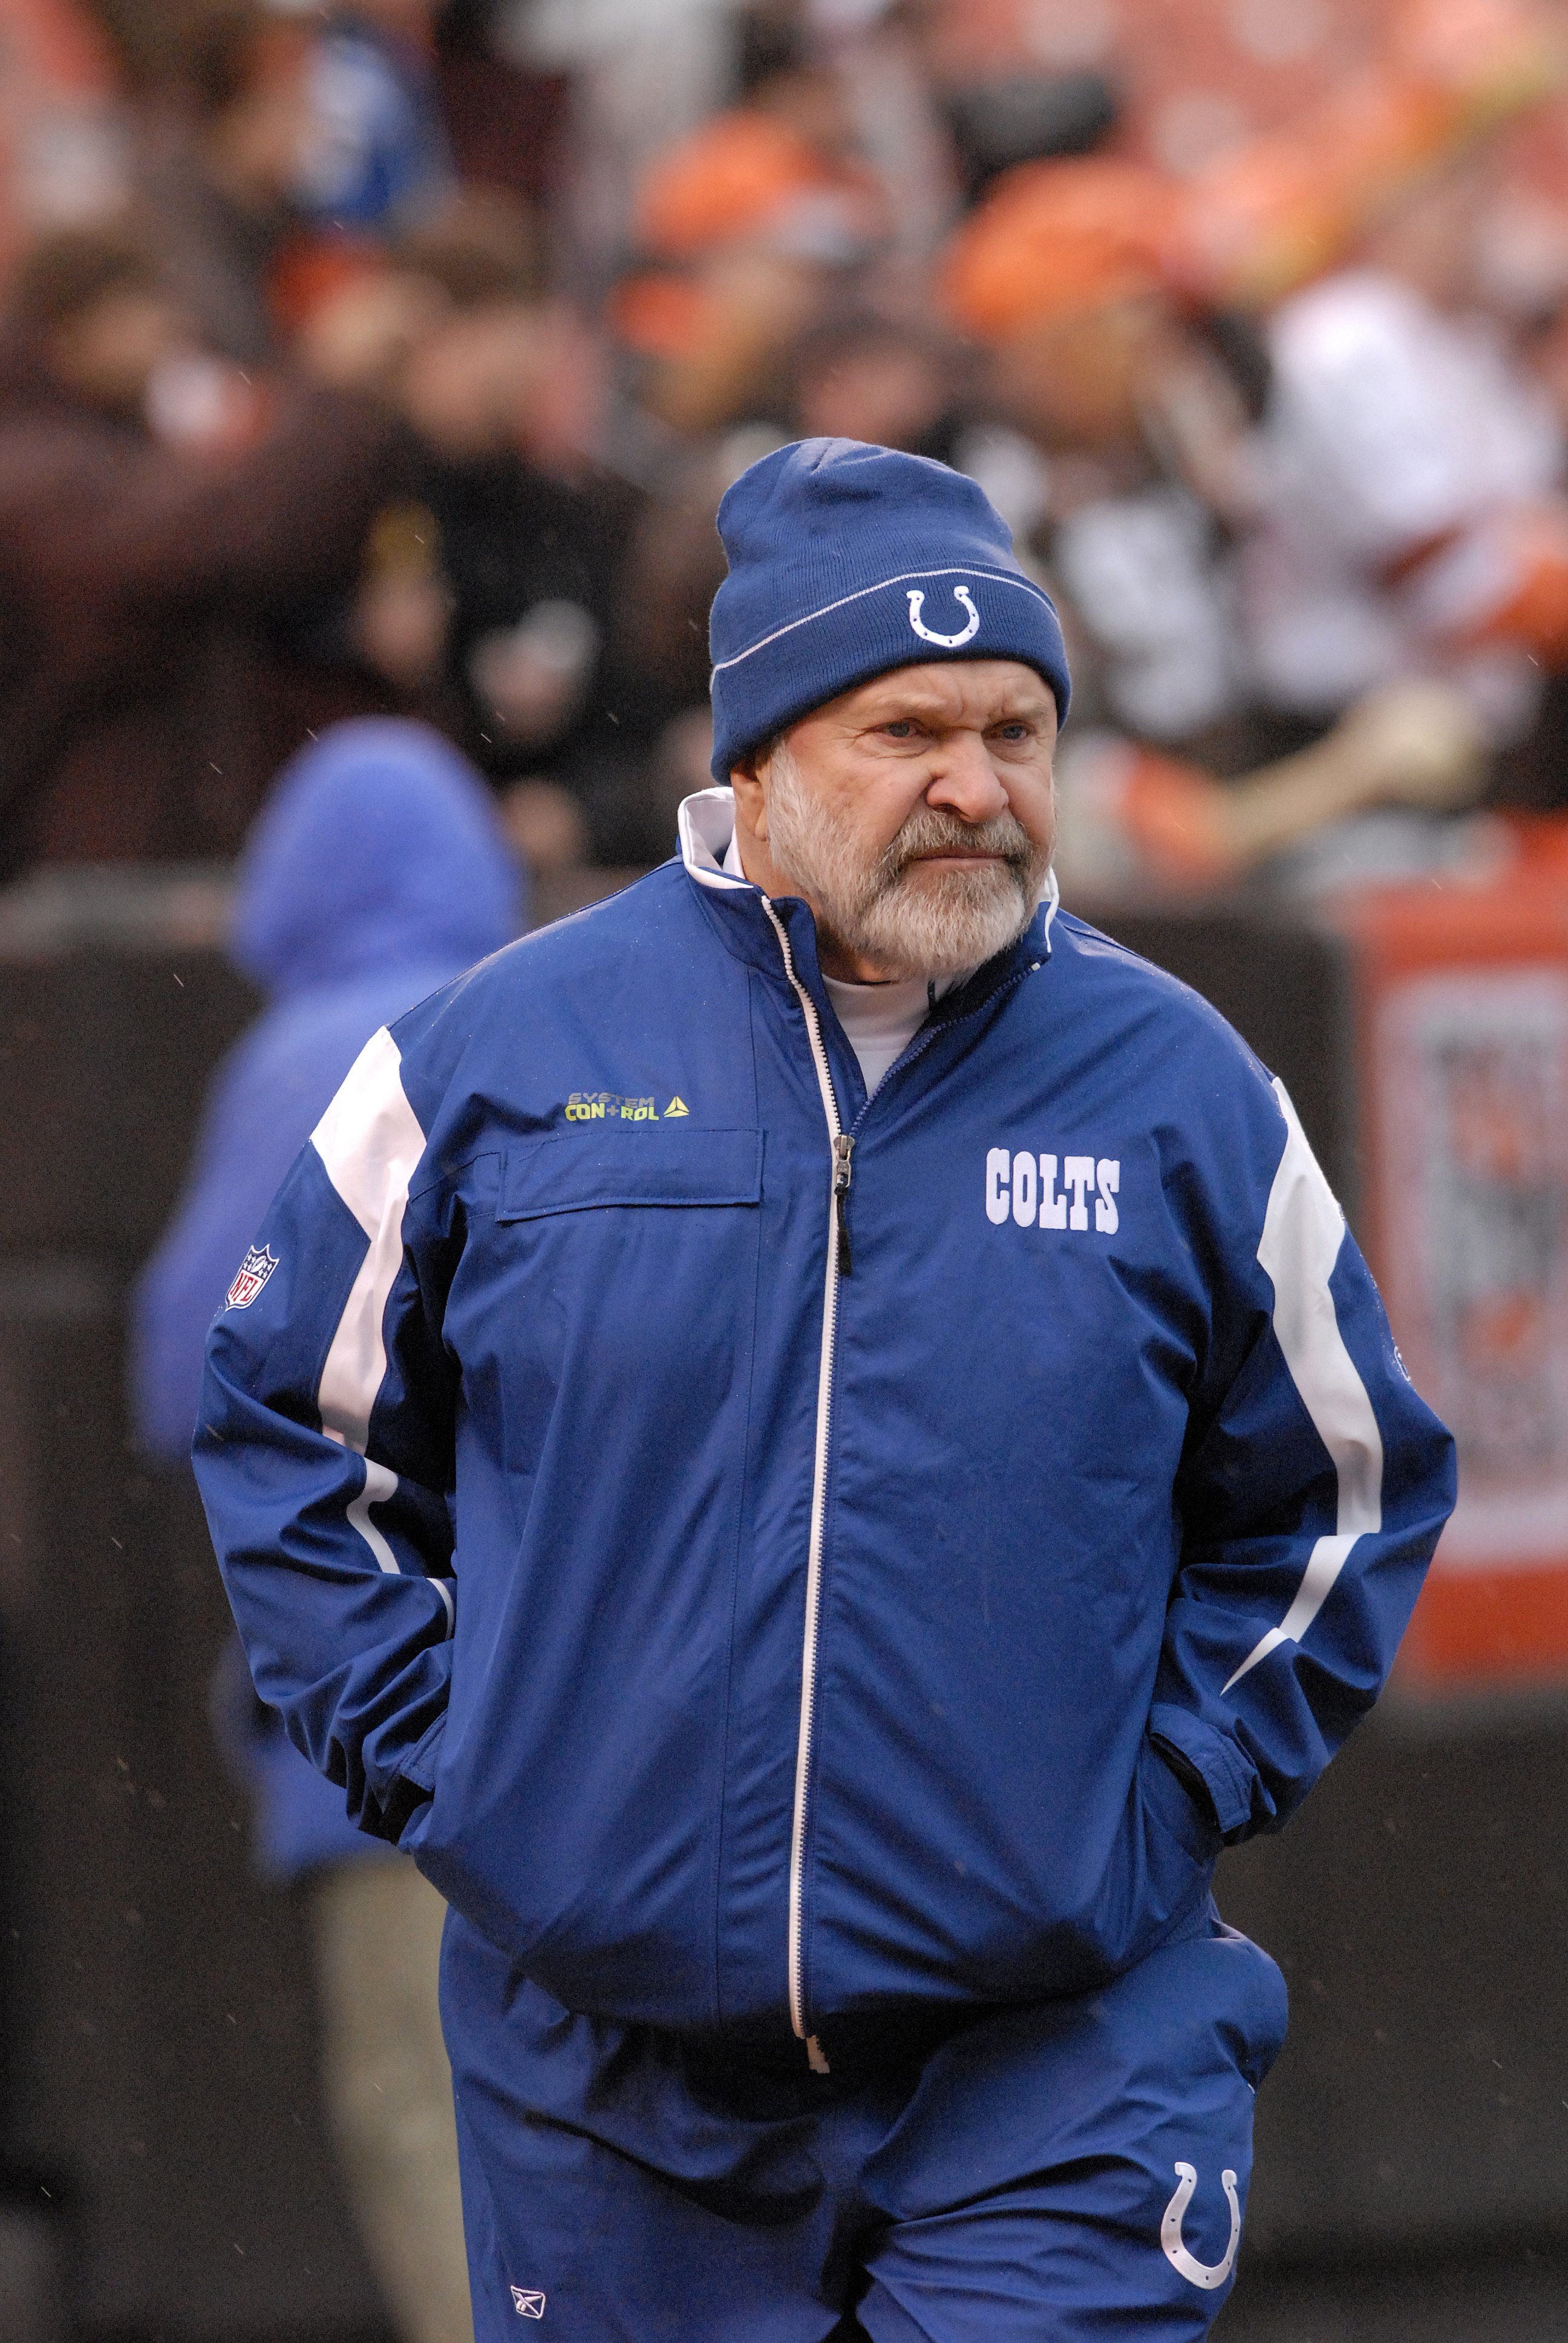 Assistant coach Howard Mudd of the Indianapolis Colts watches pre-game warm ups prior to a game on Sunday, November 30, 2008. | Source: Getty Images.